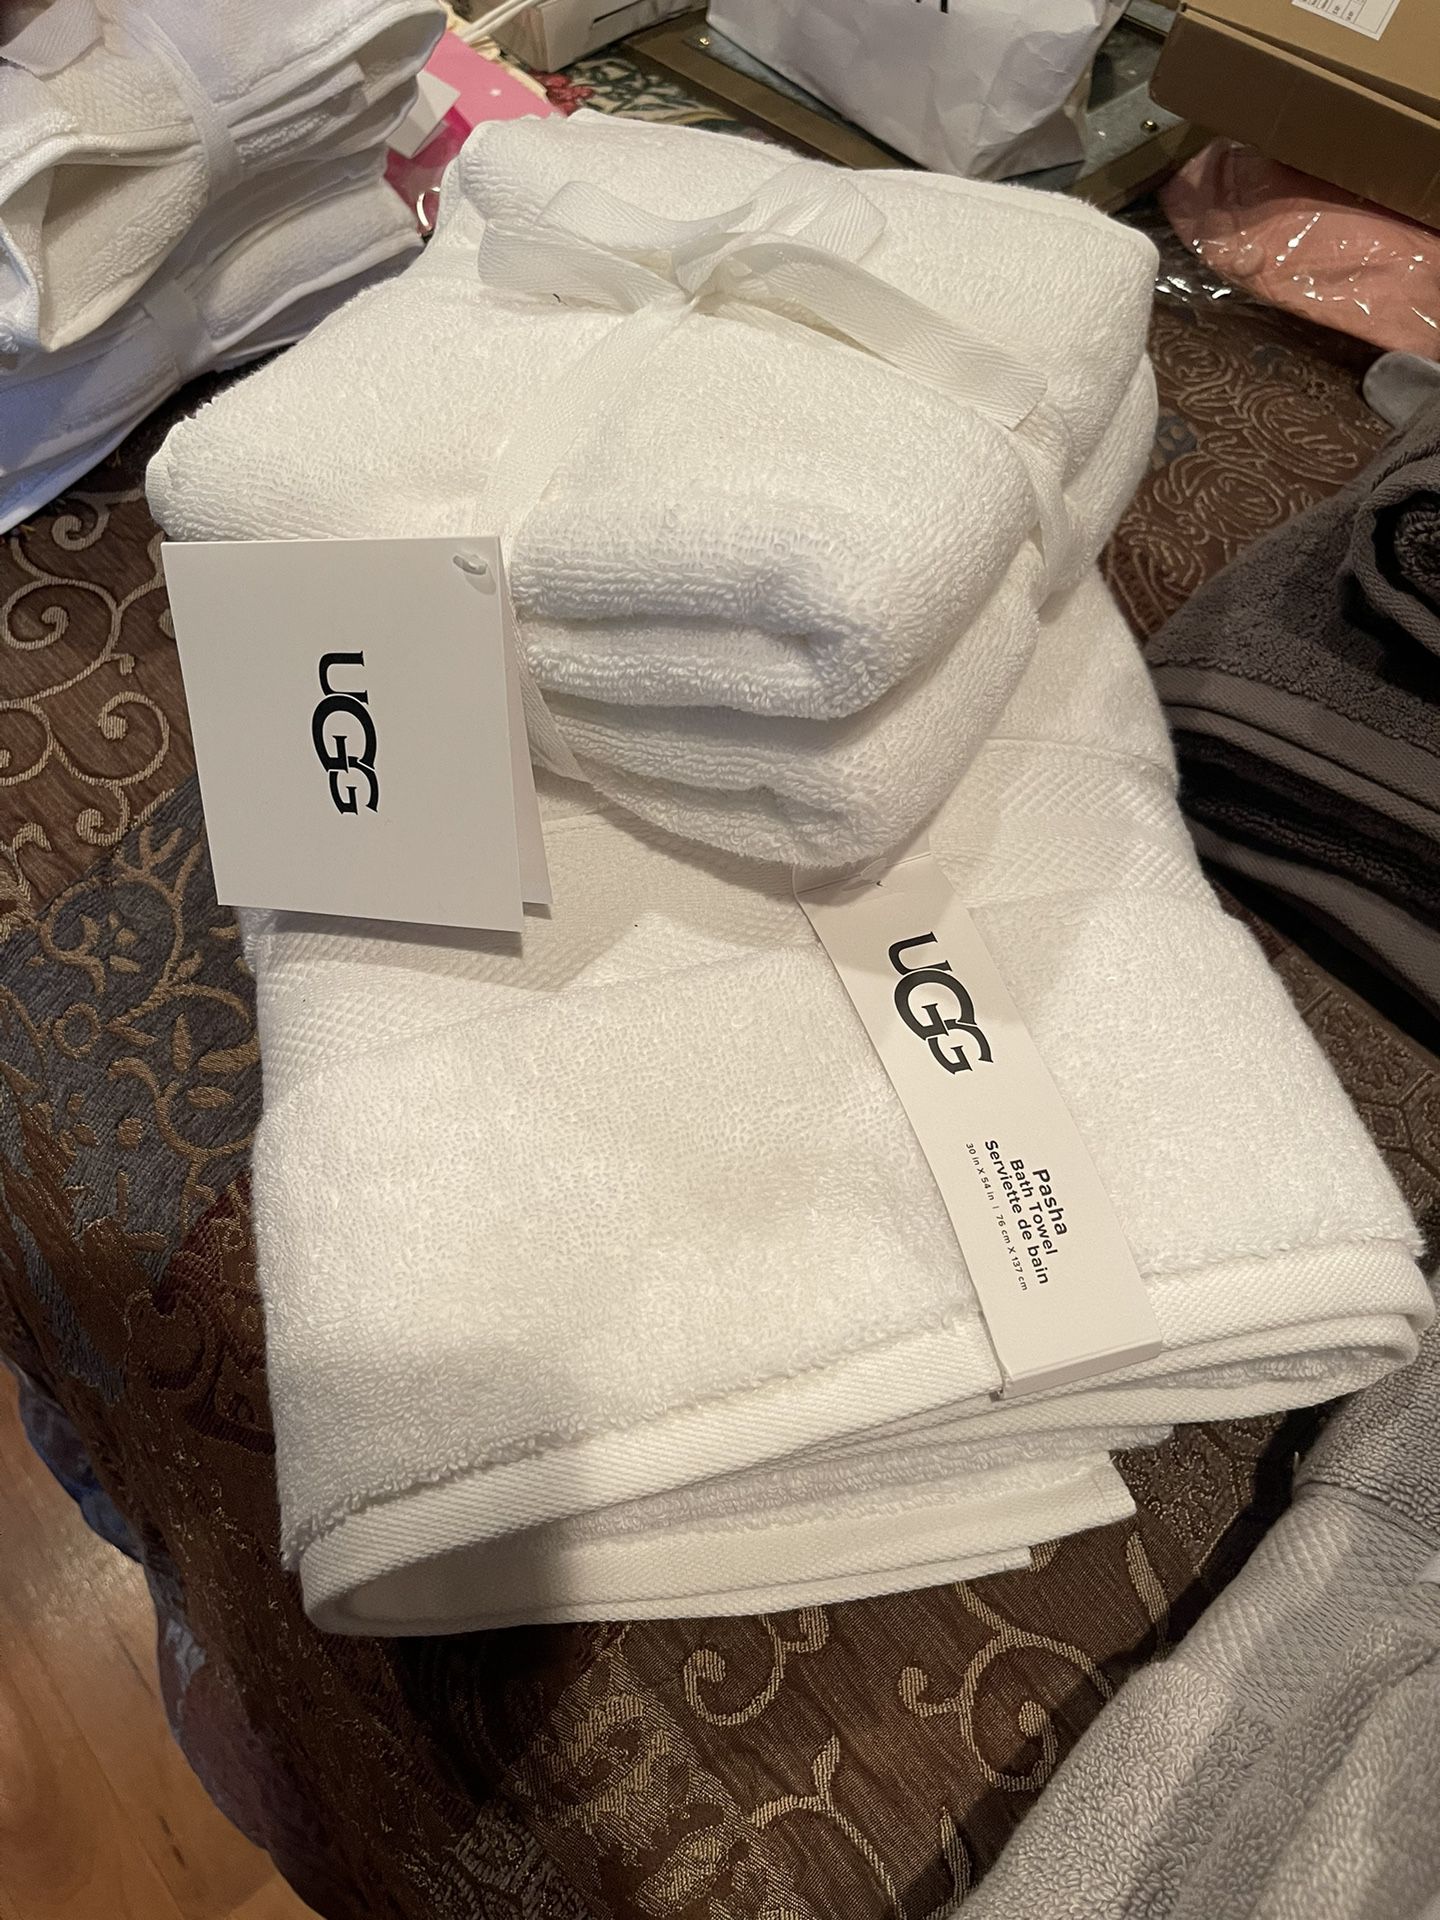 Ugg Soft Towels for Sale in Islip Terrace, NY - OfferUp